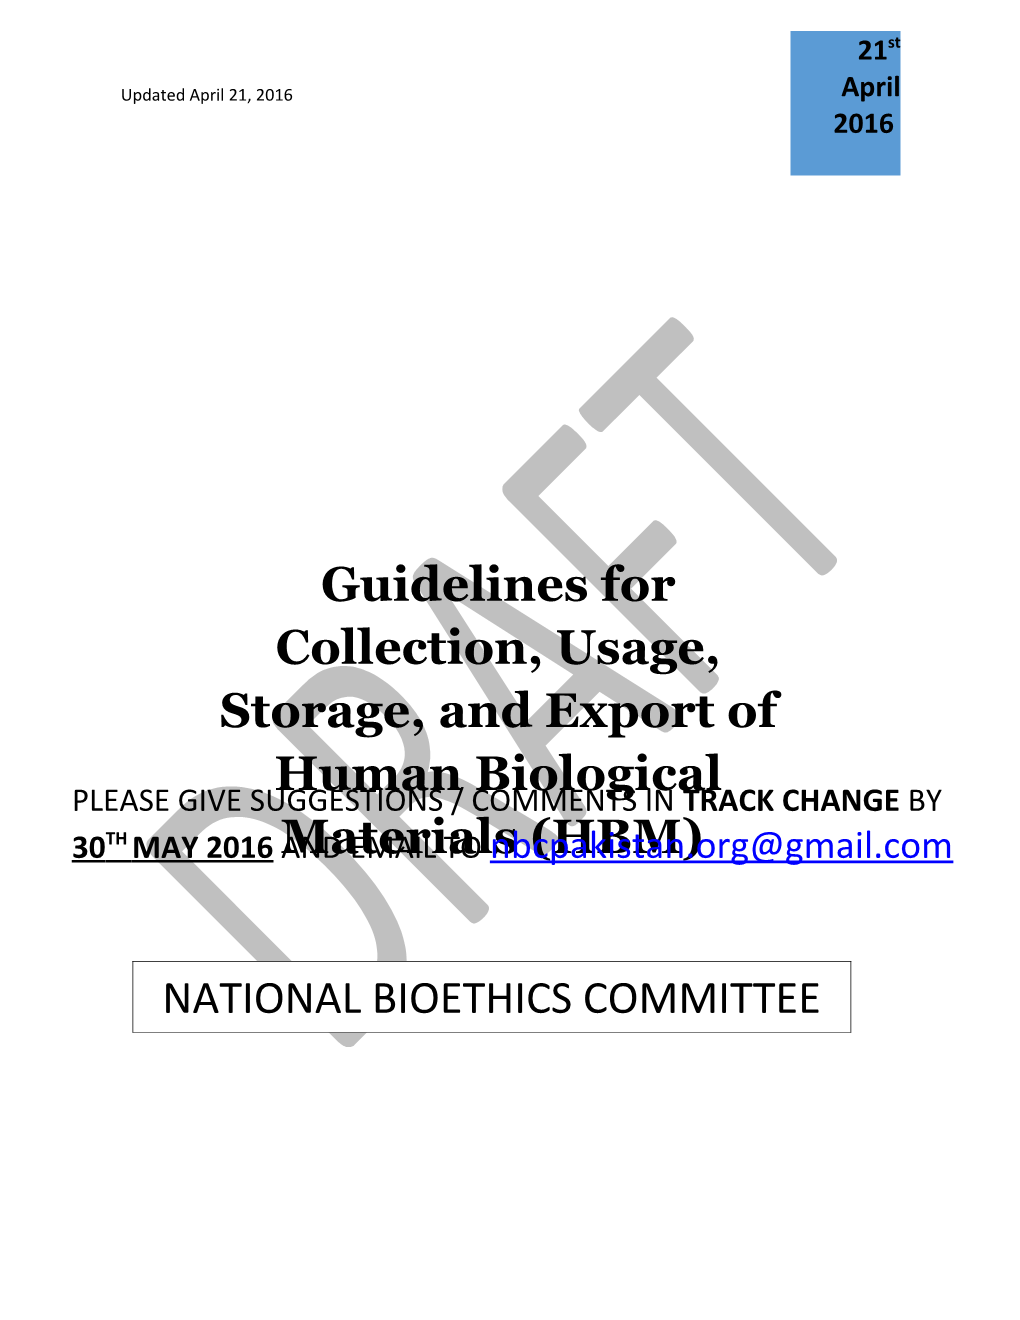 Guidelines for Collection, Usage, Storage, and Export of Human Biological Materials in Research